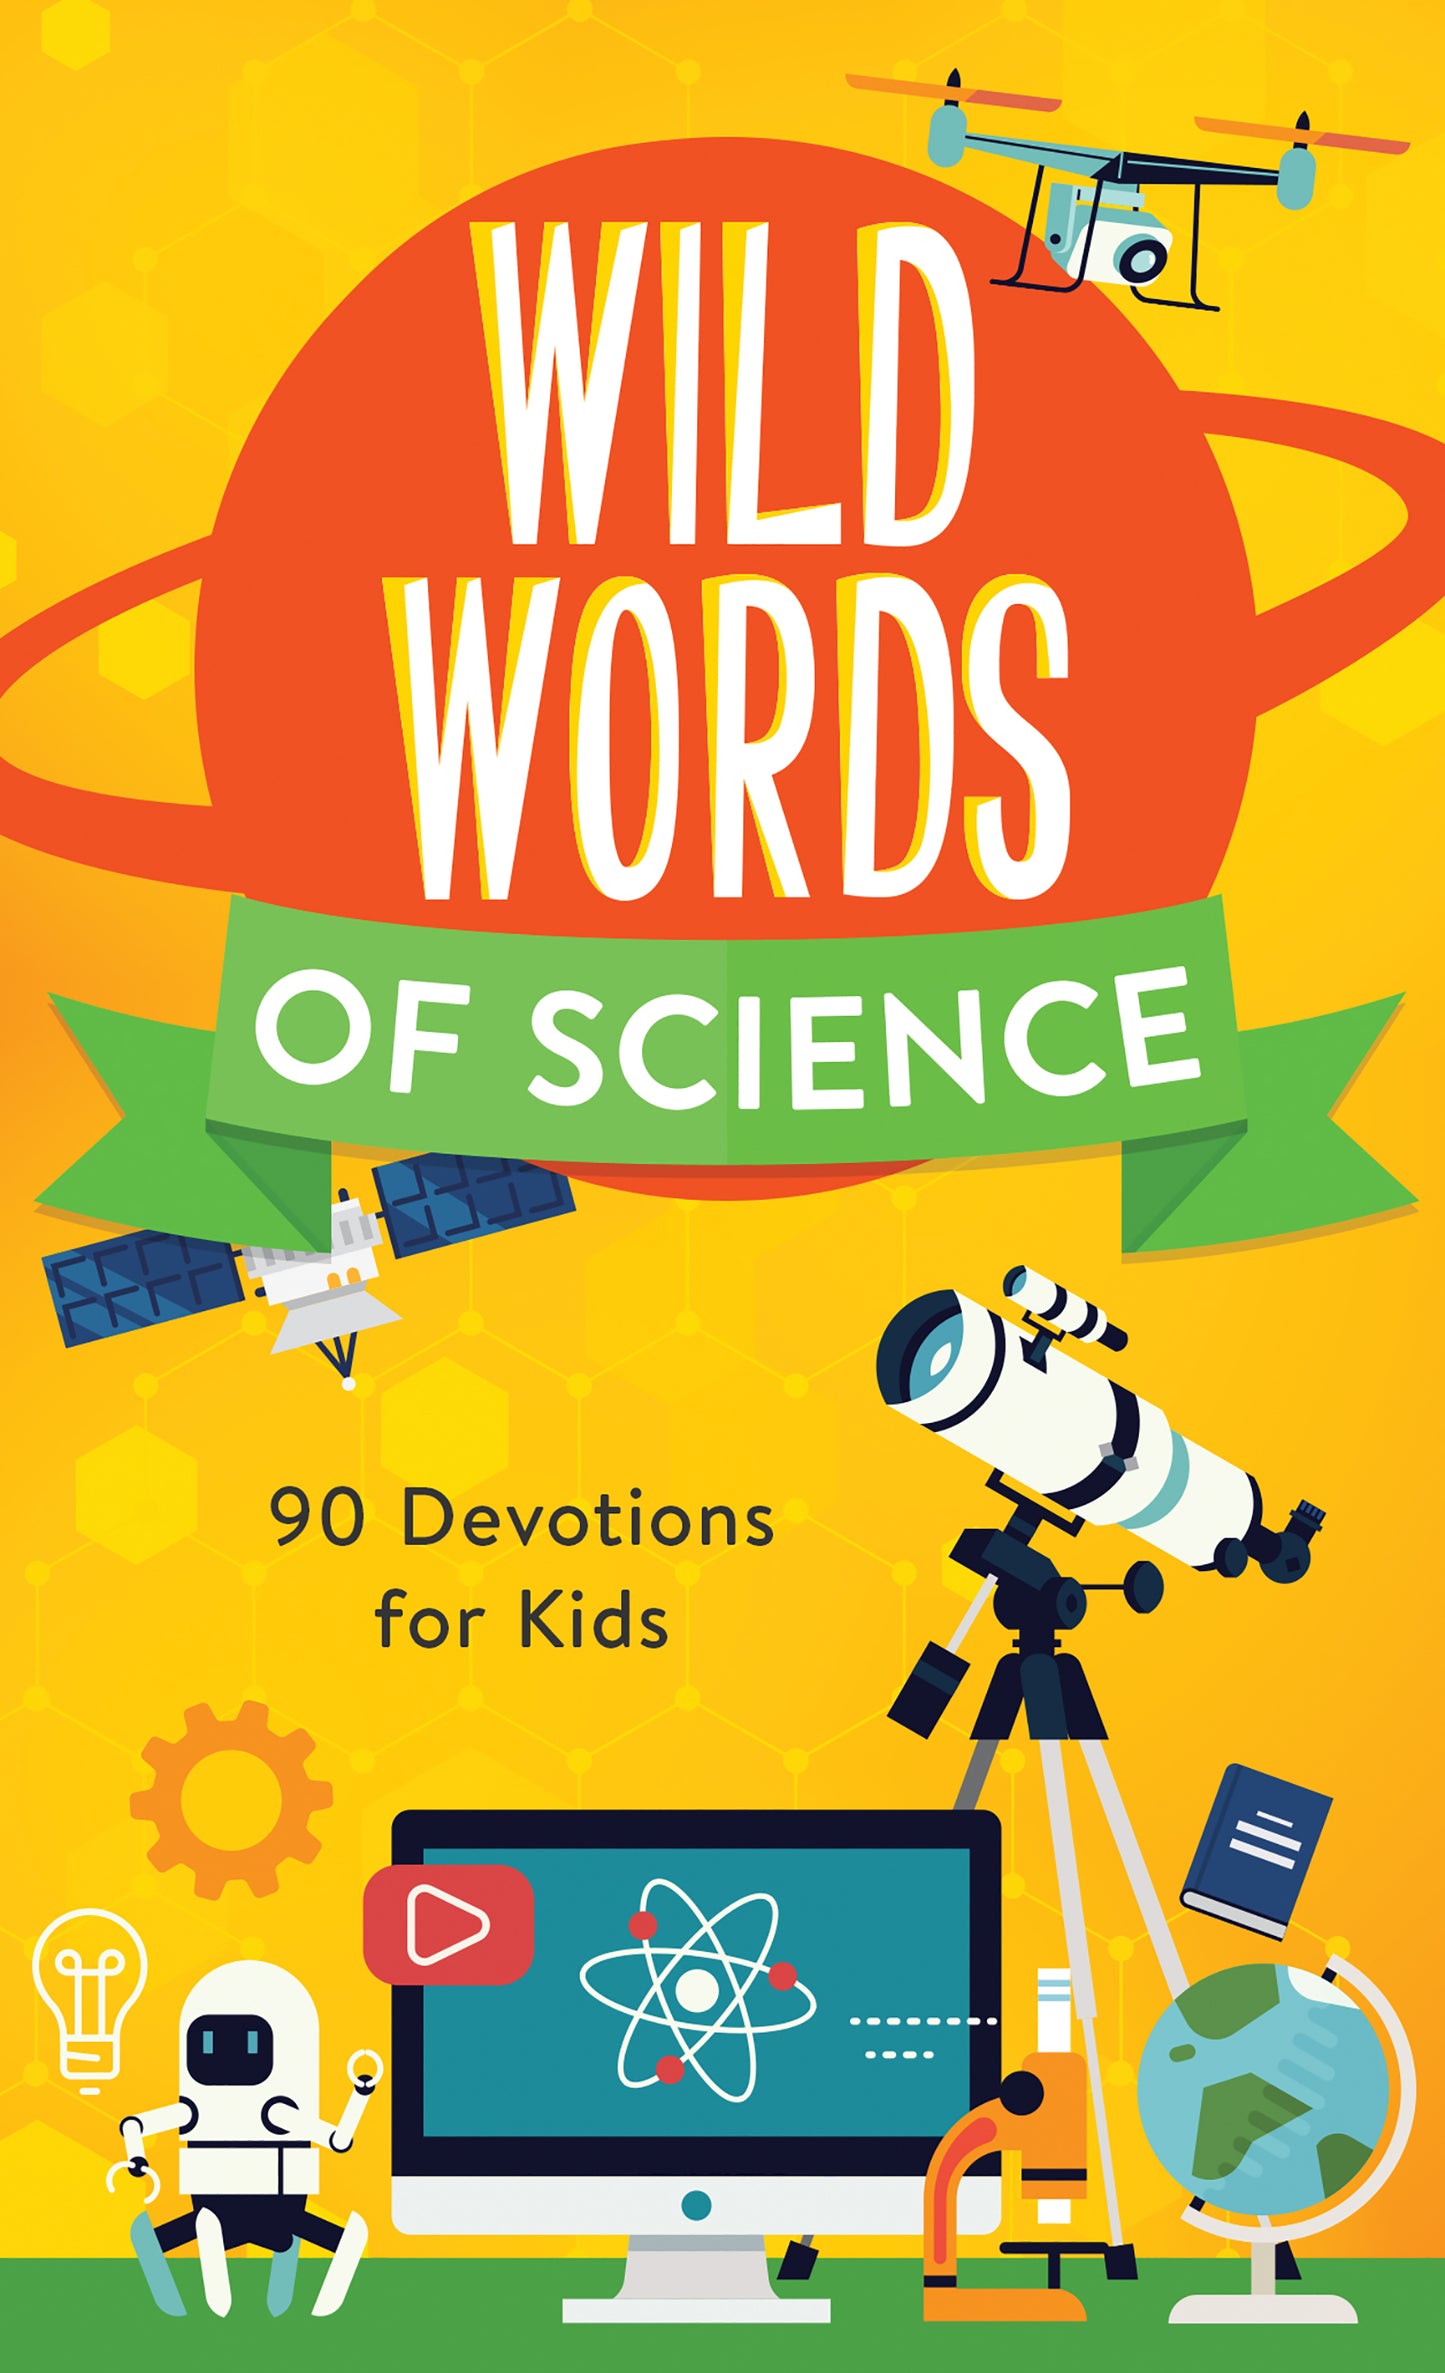 Wild Words of Science - The Christian Gift Company